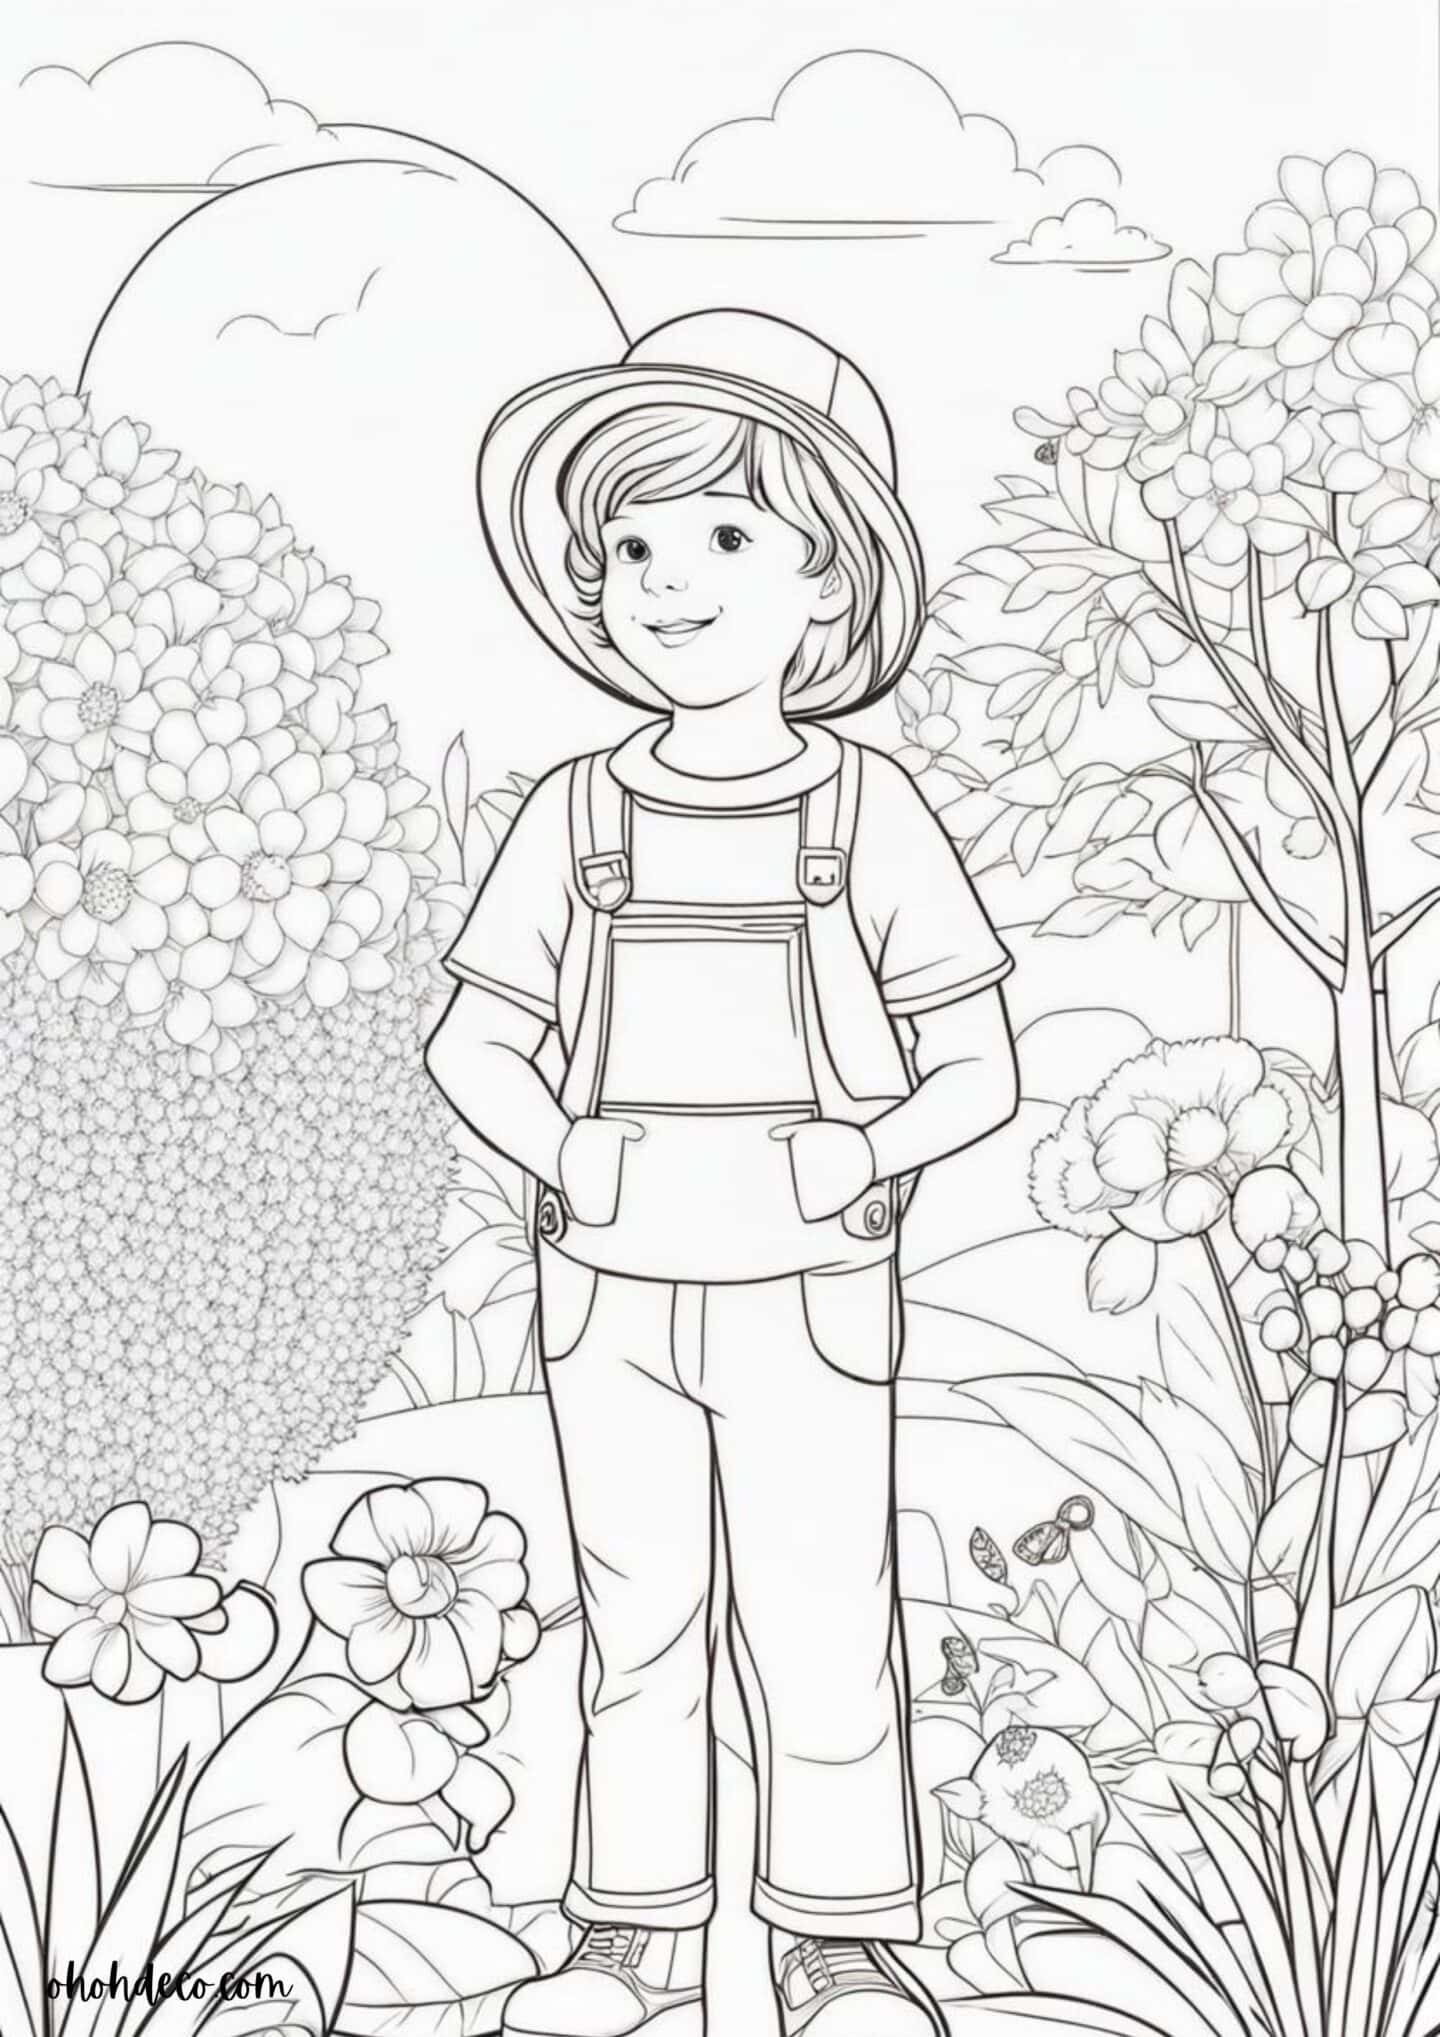 coloring page kids flower garden